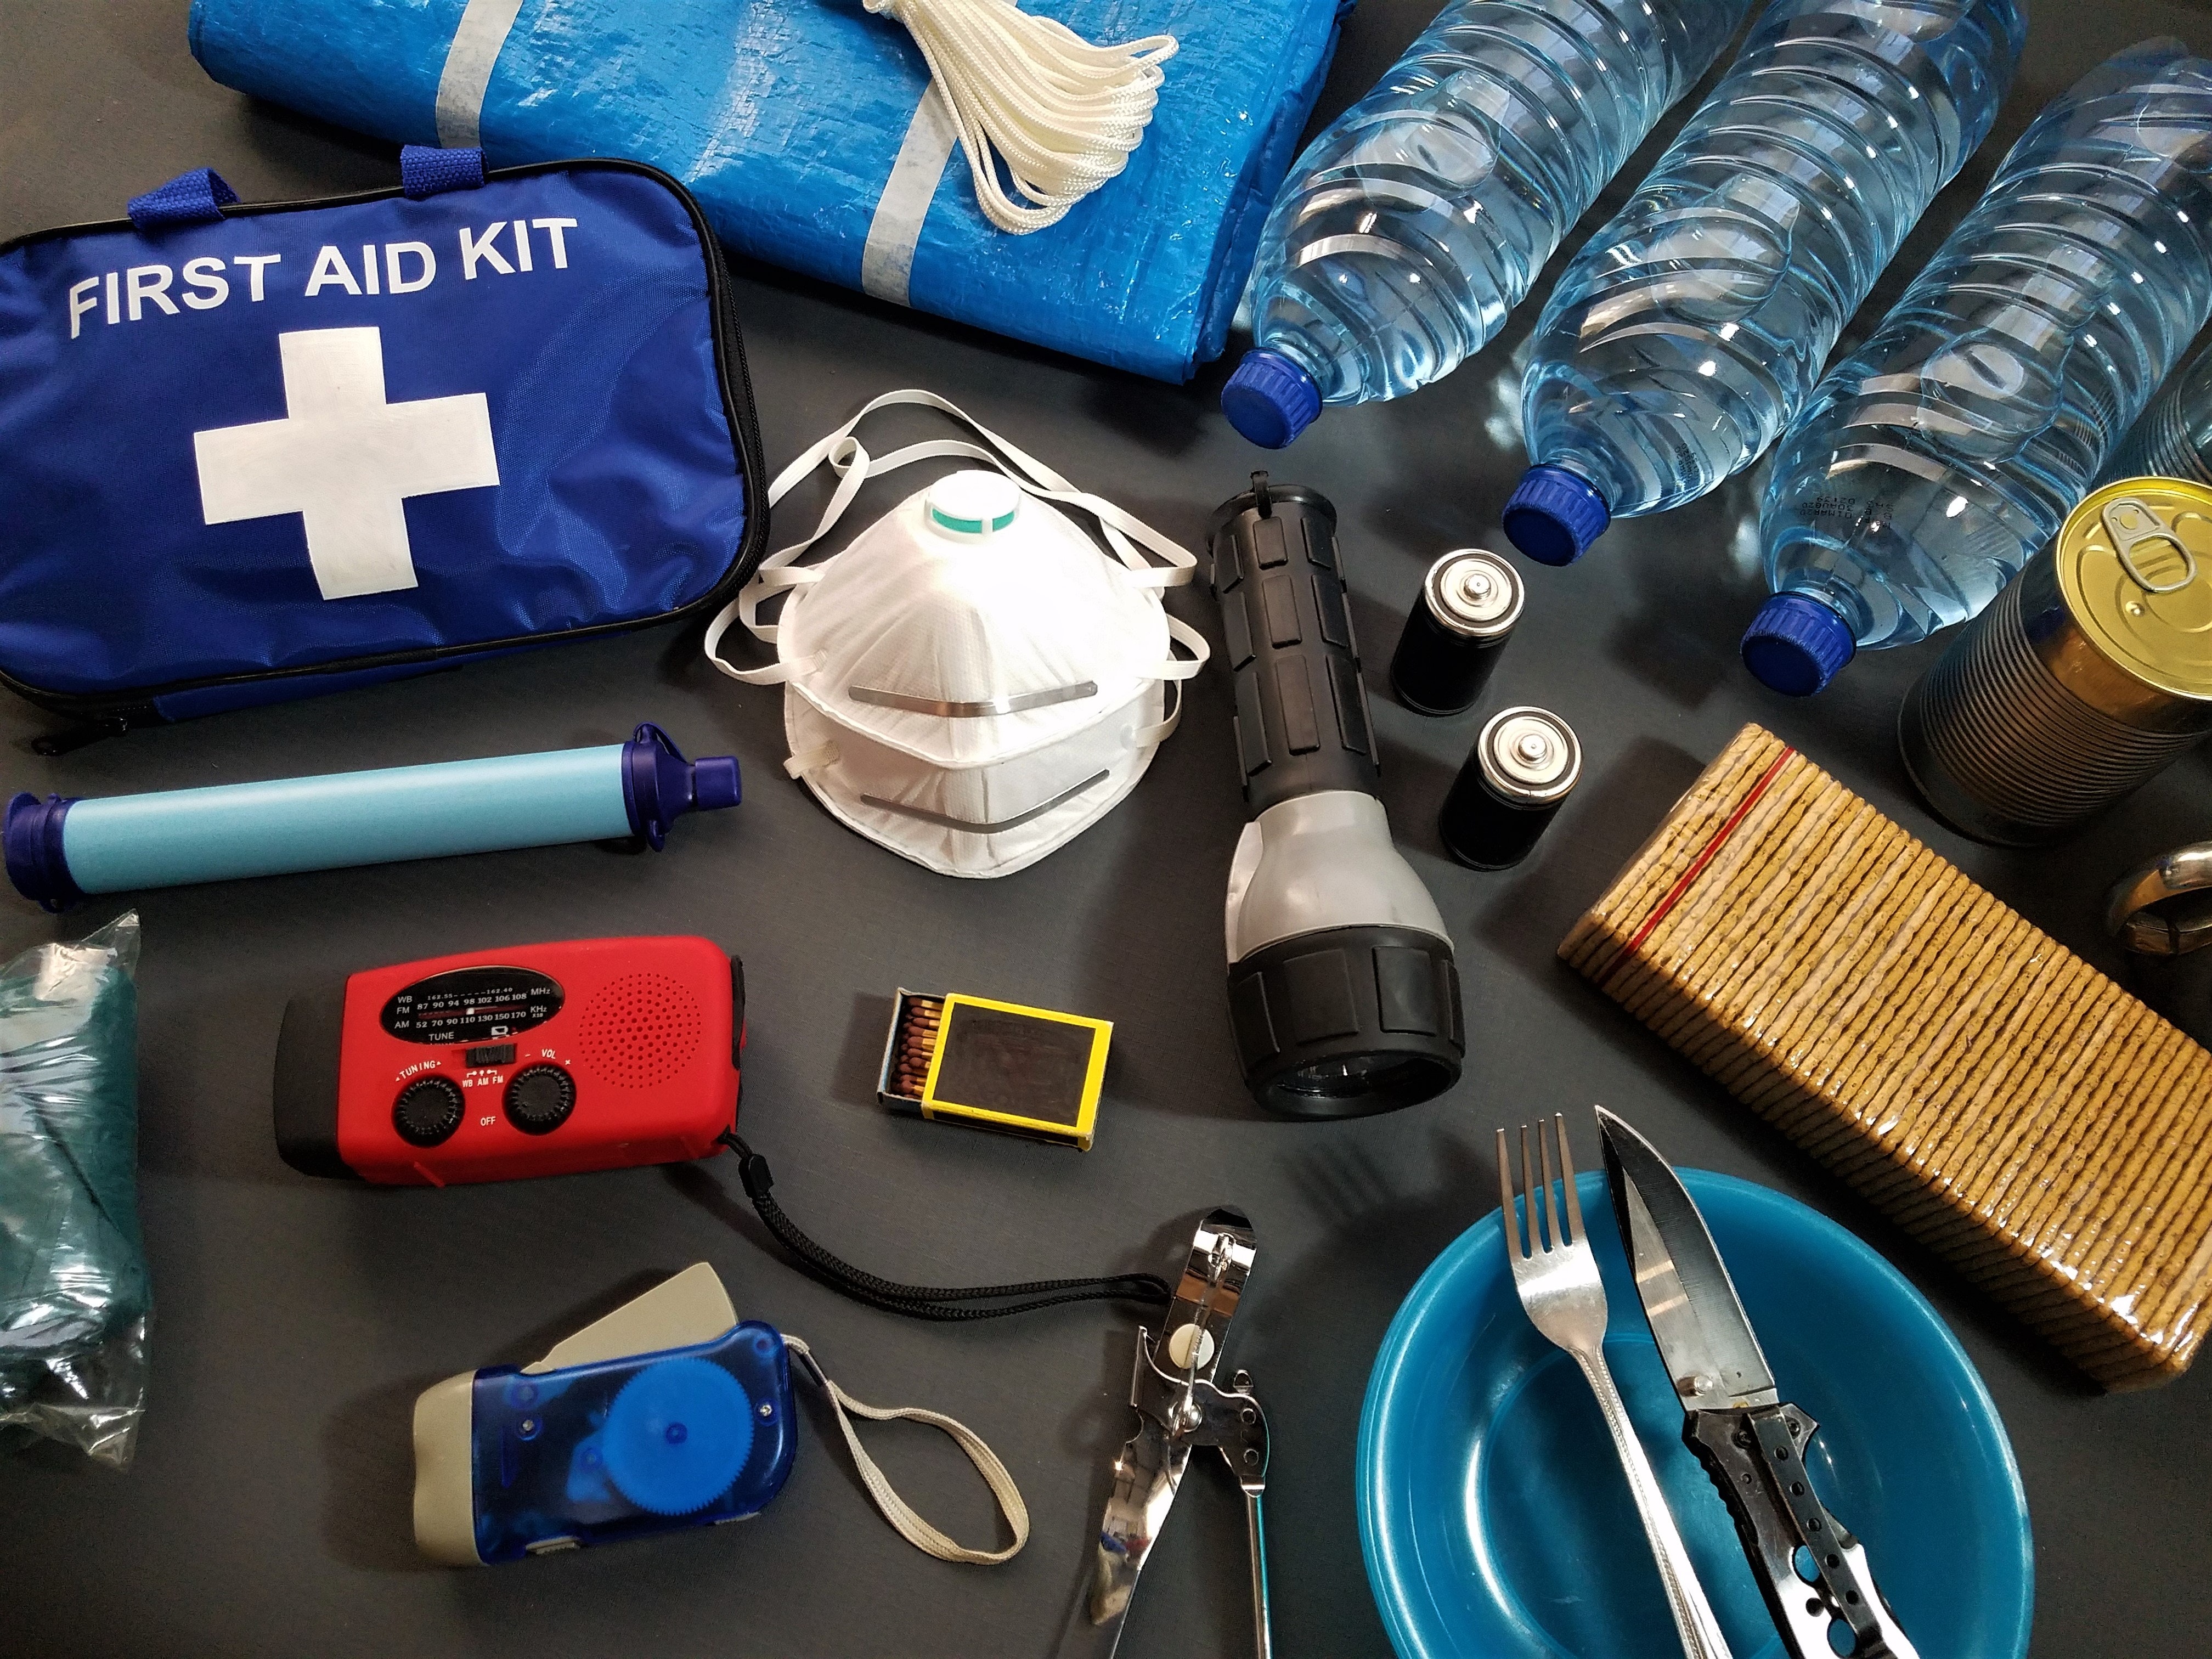 Are You Ready? 7 Emergency Survival Kit Essentials to Prepare for Anything